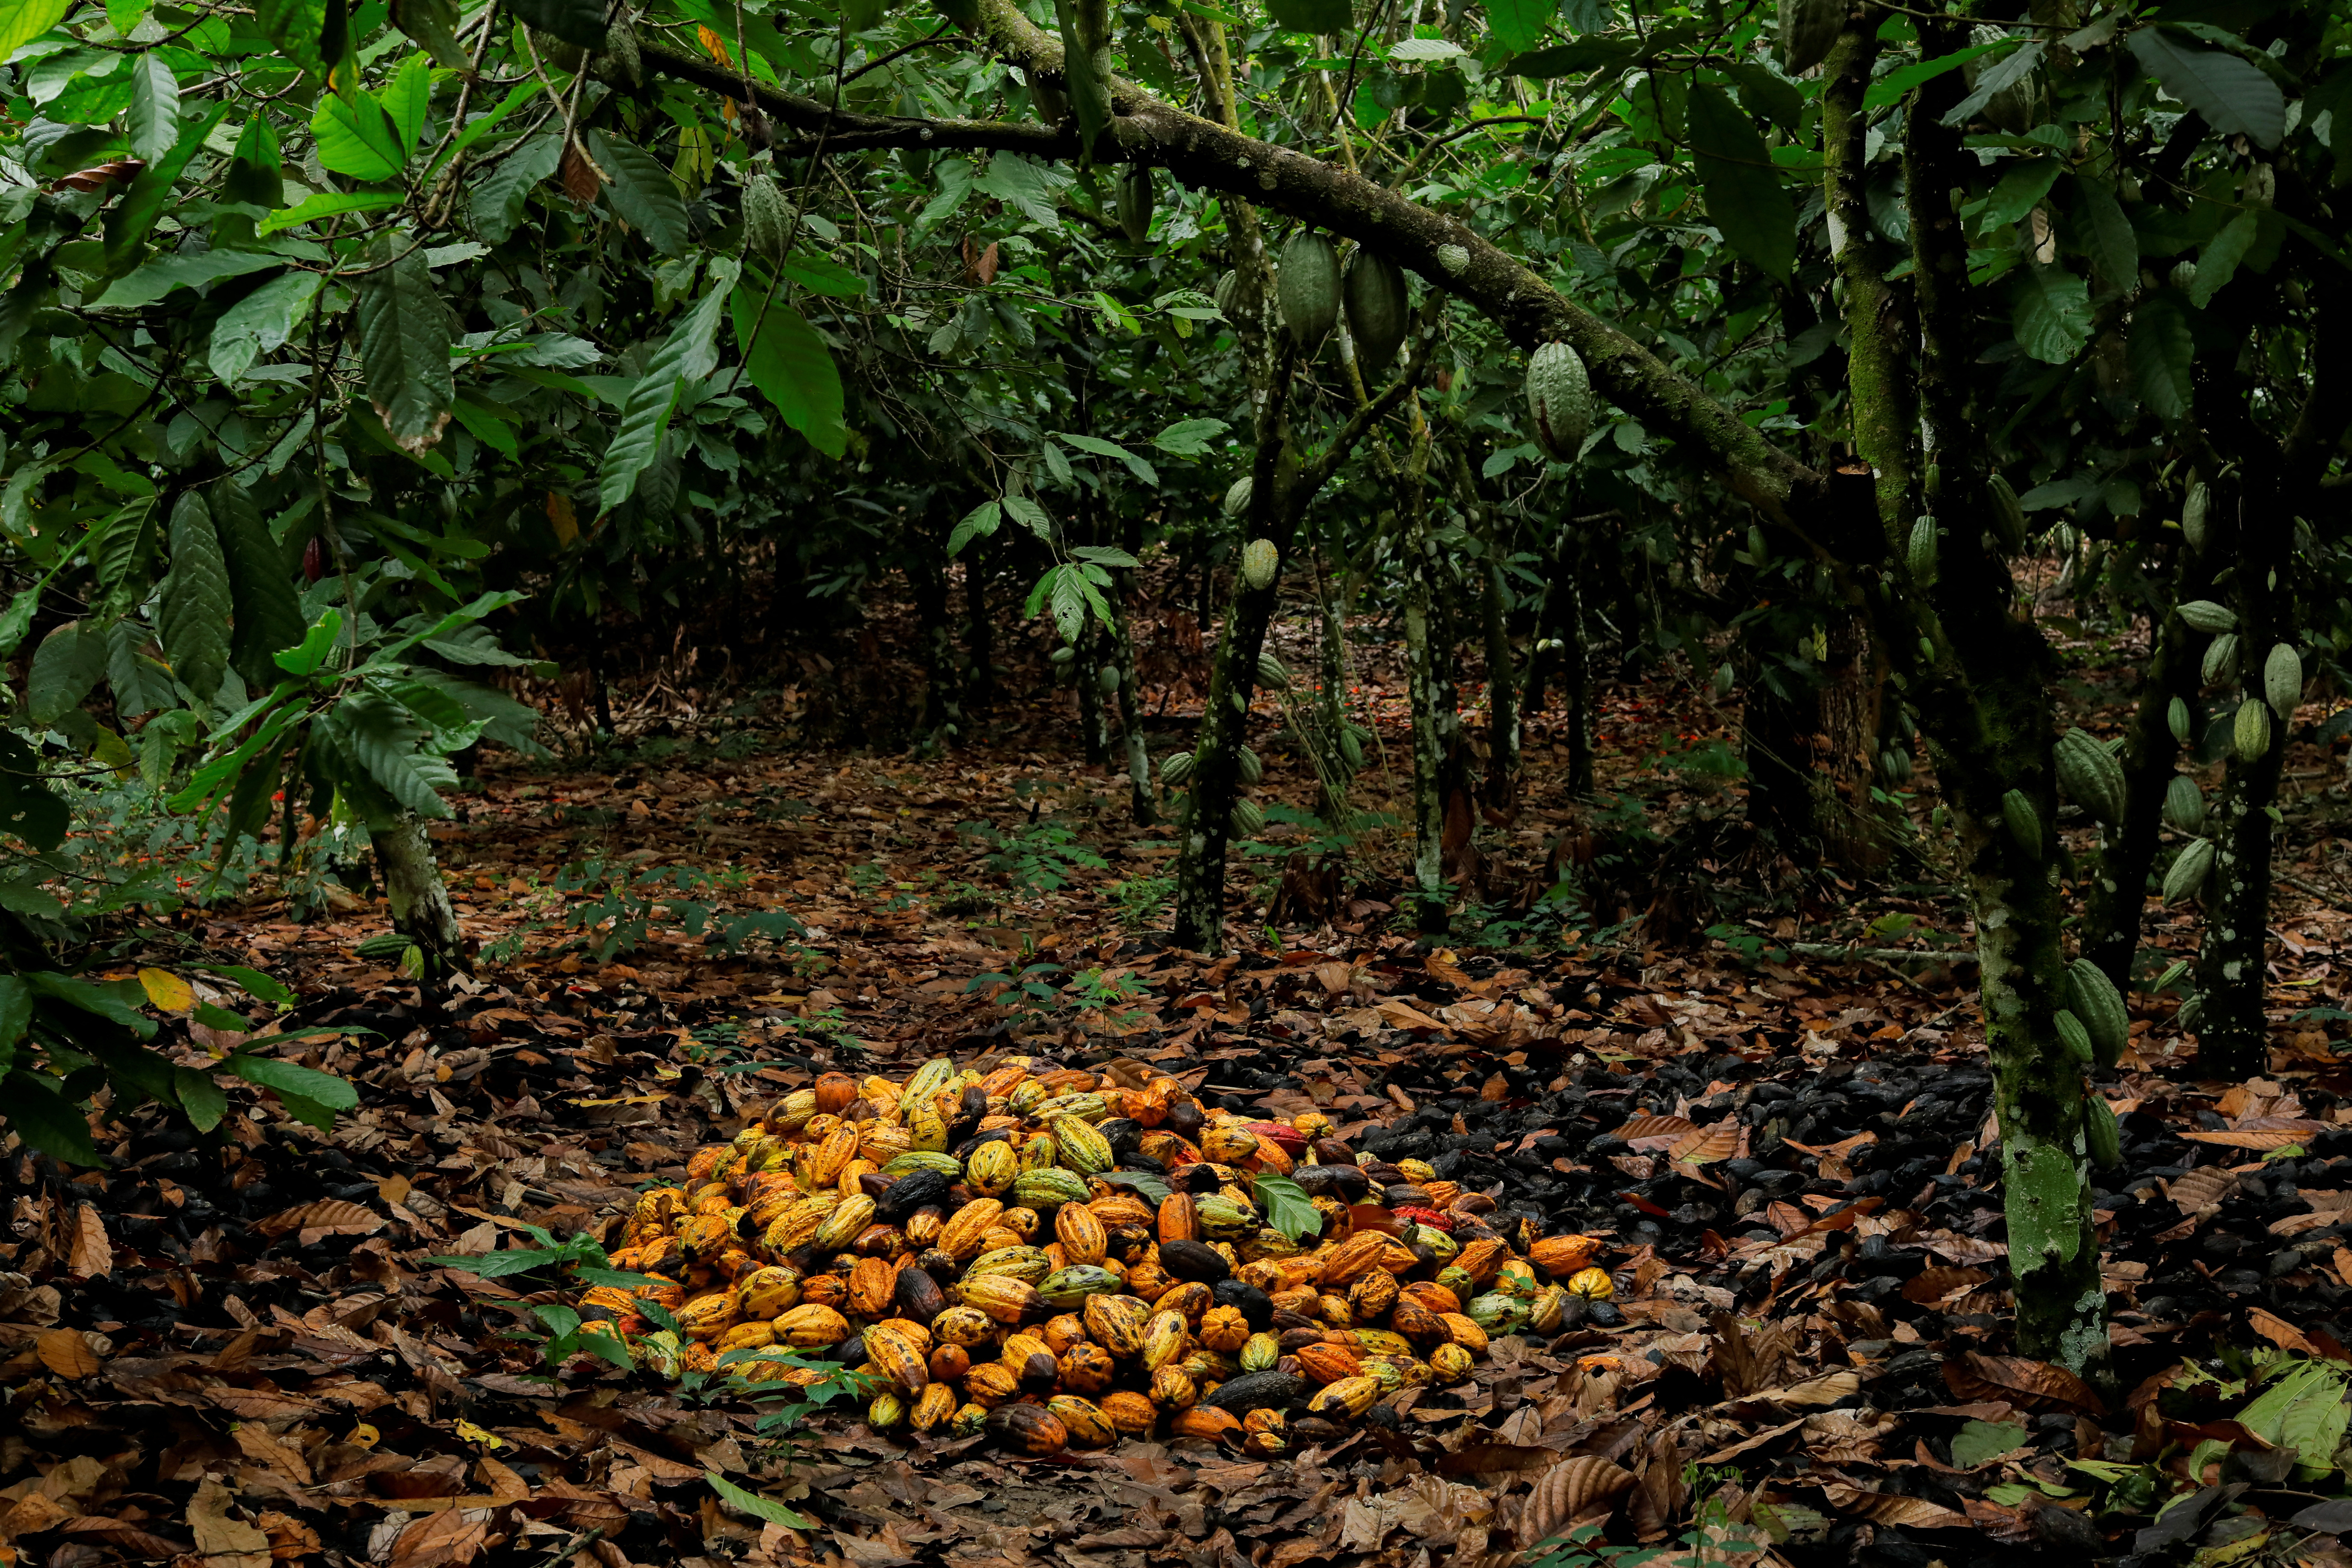 Cocoa pods harvested in a cocoa farm are seen near the village of Kusa in the Ashanti region of Ghana